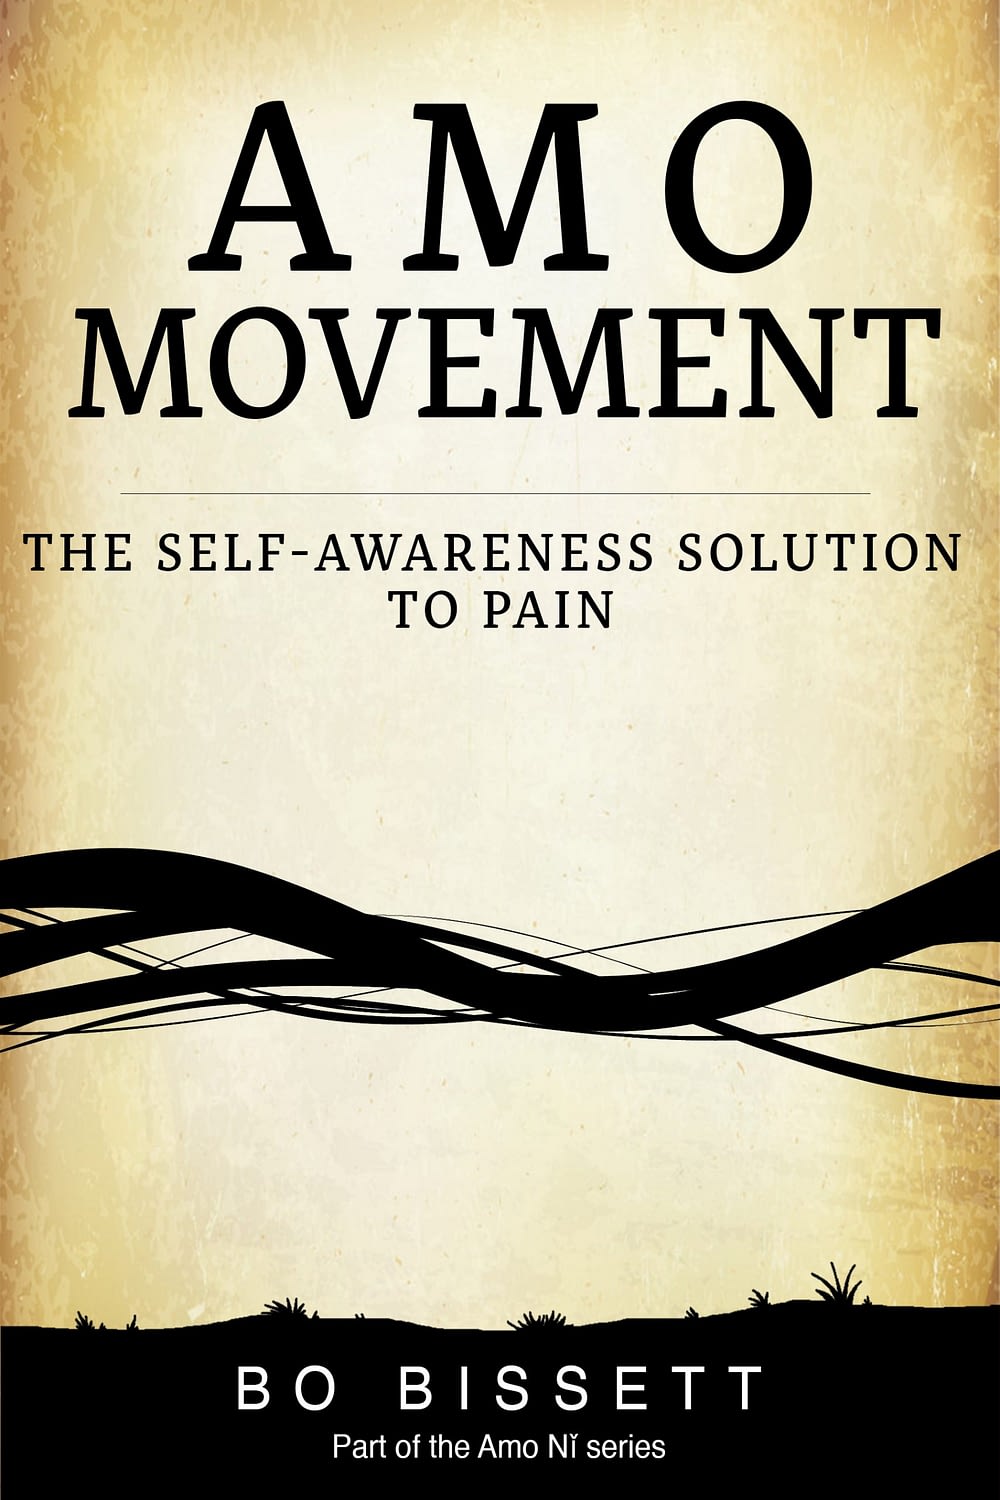 Self-Awareness Solution for Pain